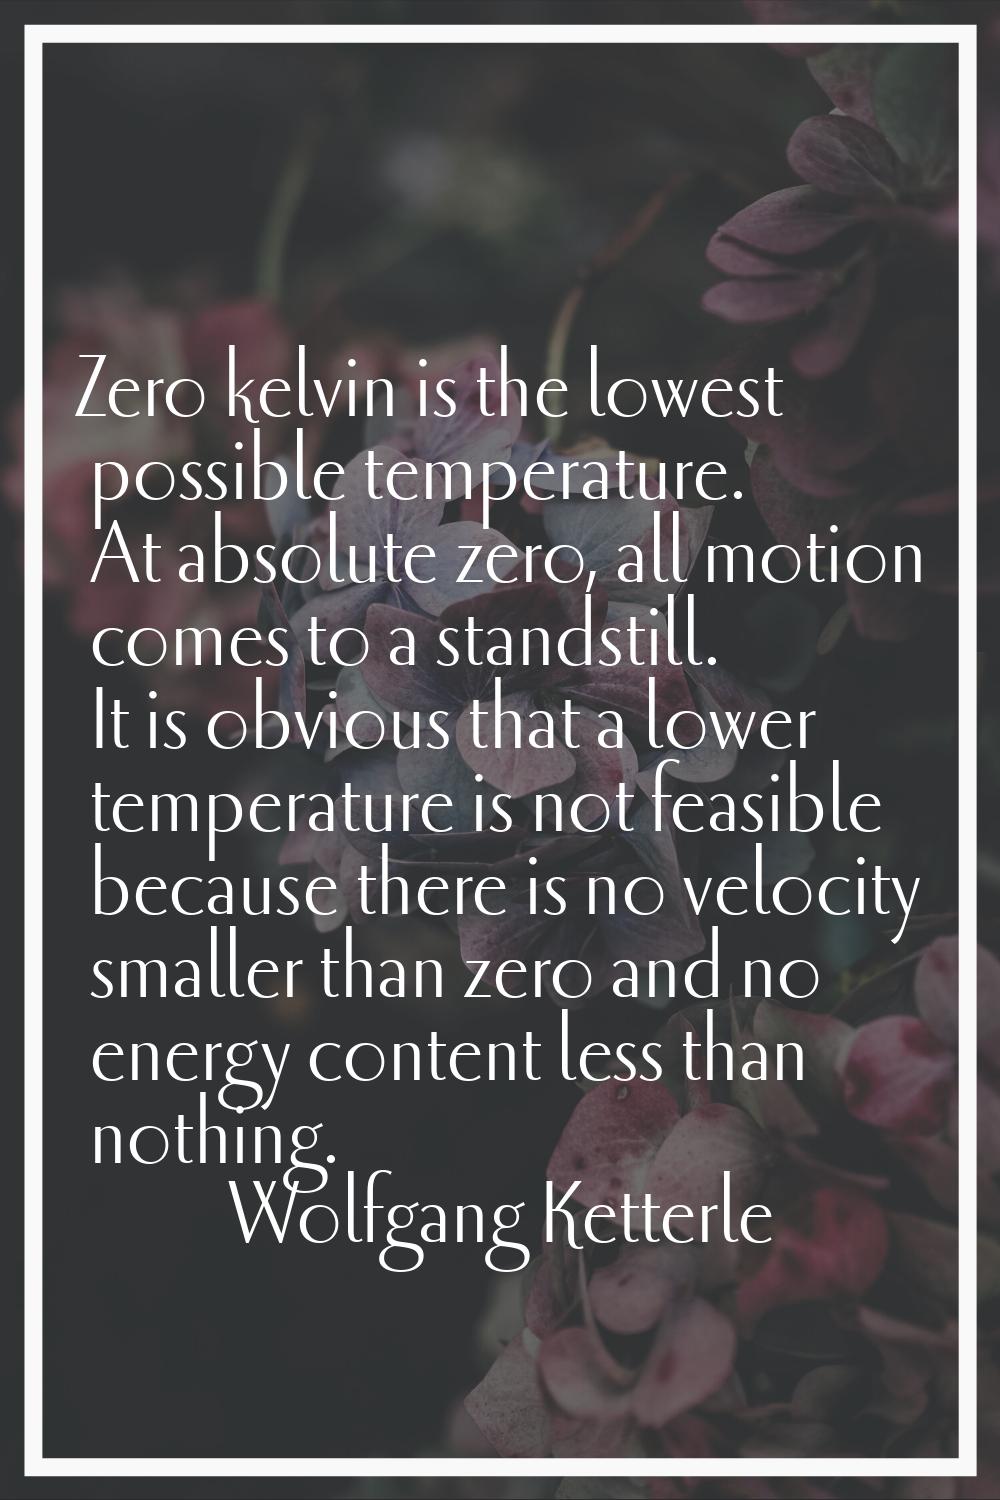 Zero kelvin is the lowest possible temperature. At absolute zero, all motion comes to a standstill.